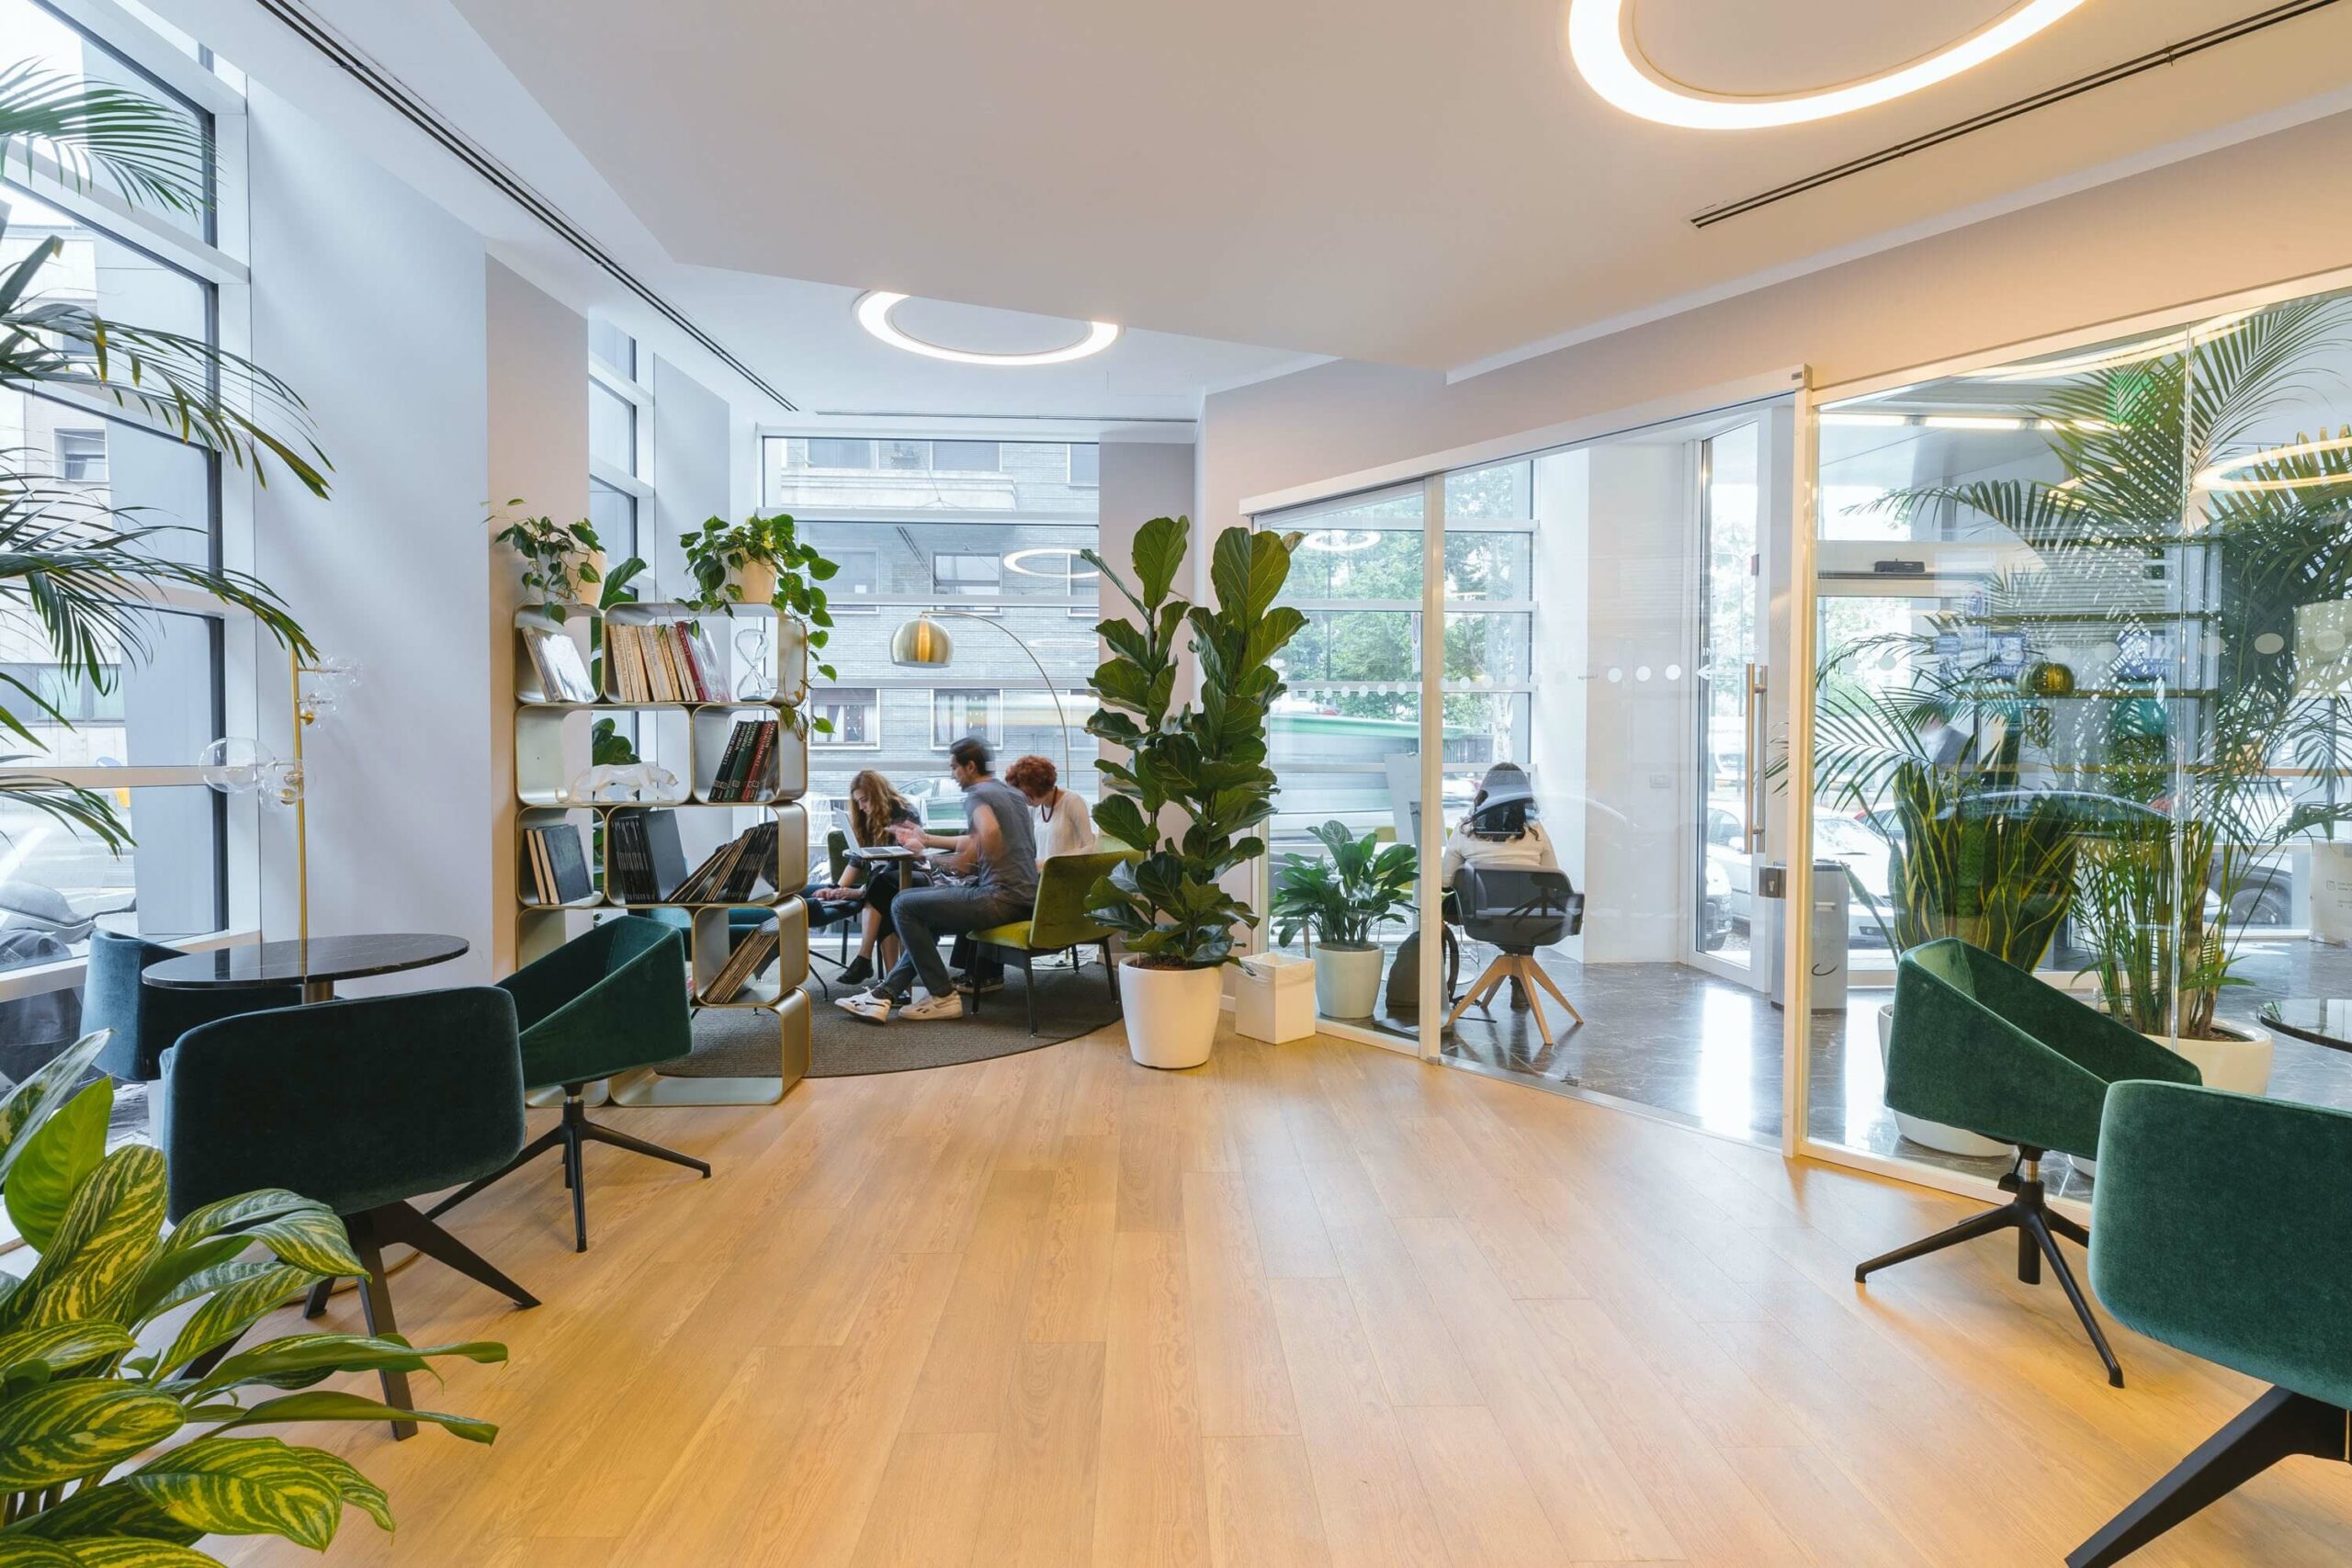 What Is Hotdesking And Why Is It So Popular In London?